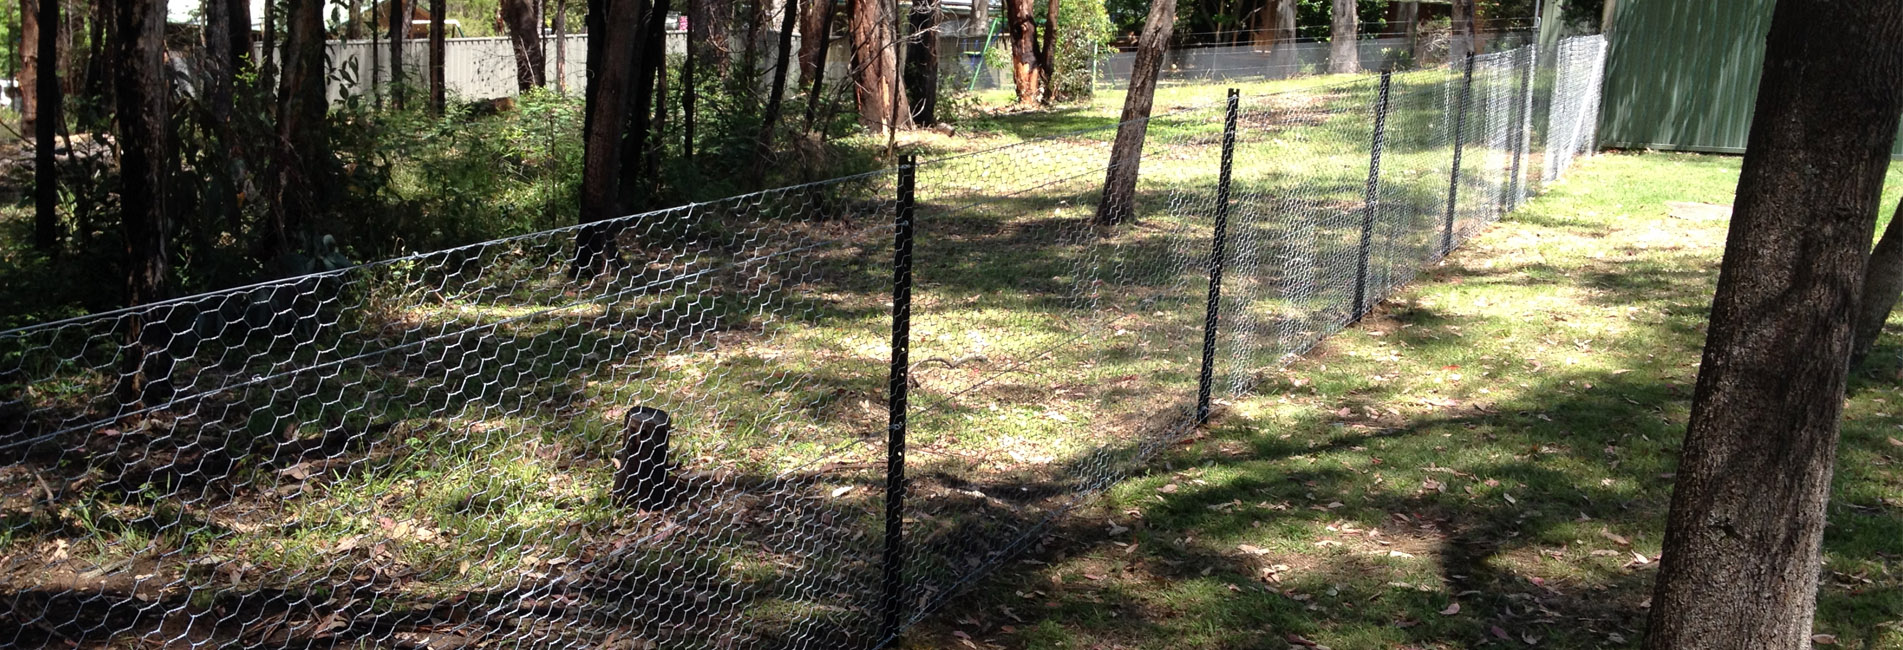 Fire Fencing and Chain Wire Fences Springwood